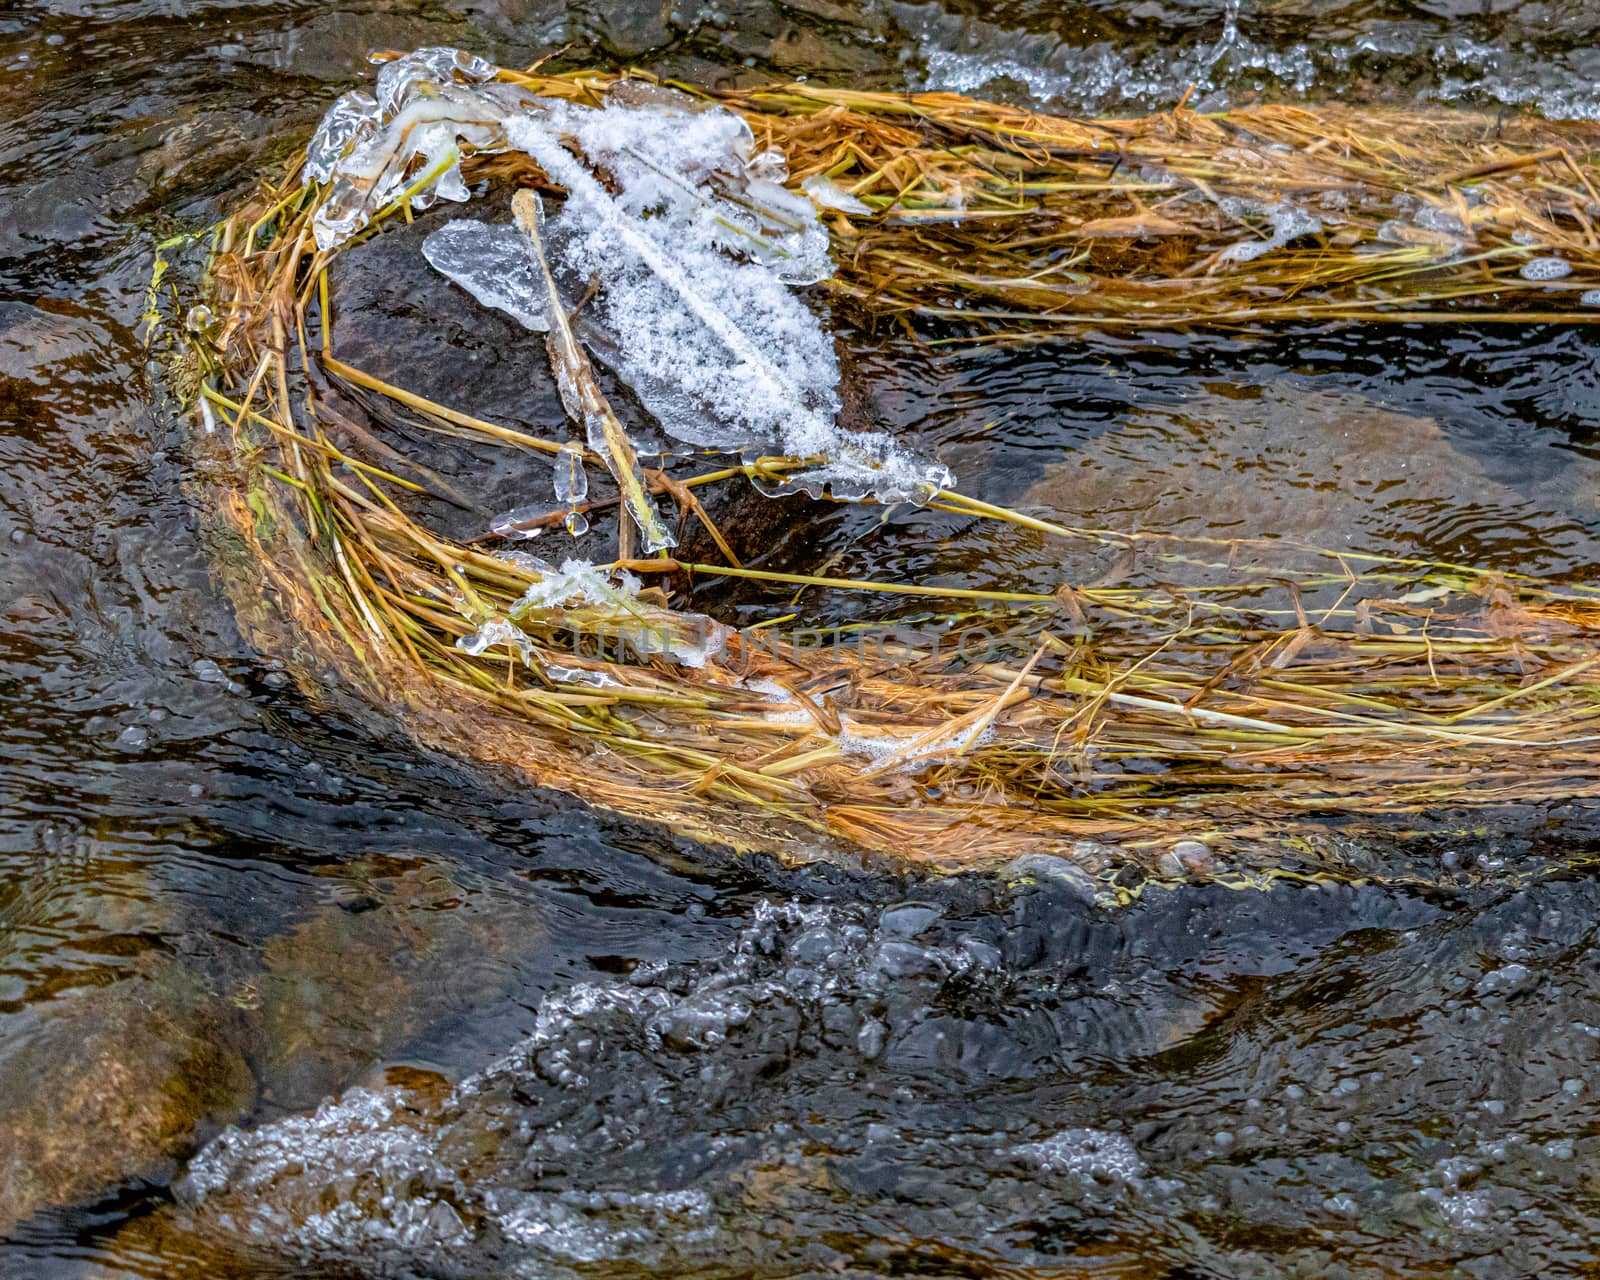 Dead weeds are caught against a rock in a flowing creek. The stream of water pushes them along, but they remain curved around the stone, which has a cap of ice on it.